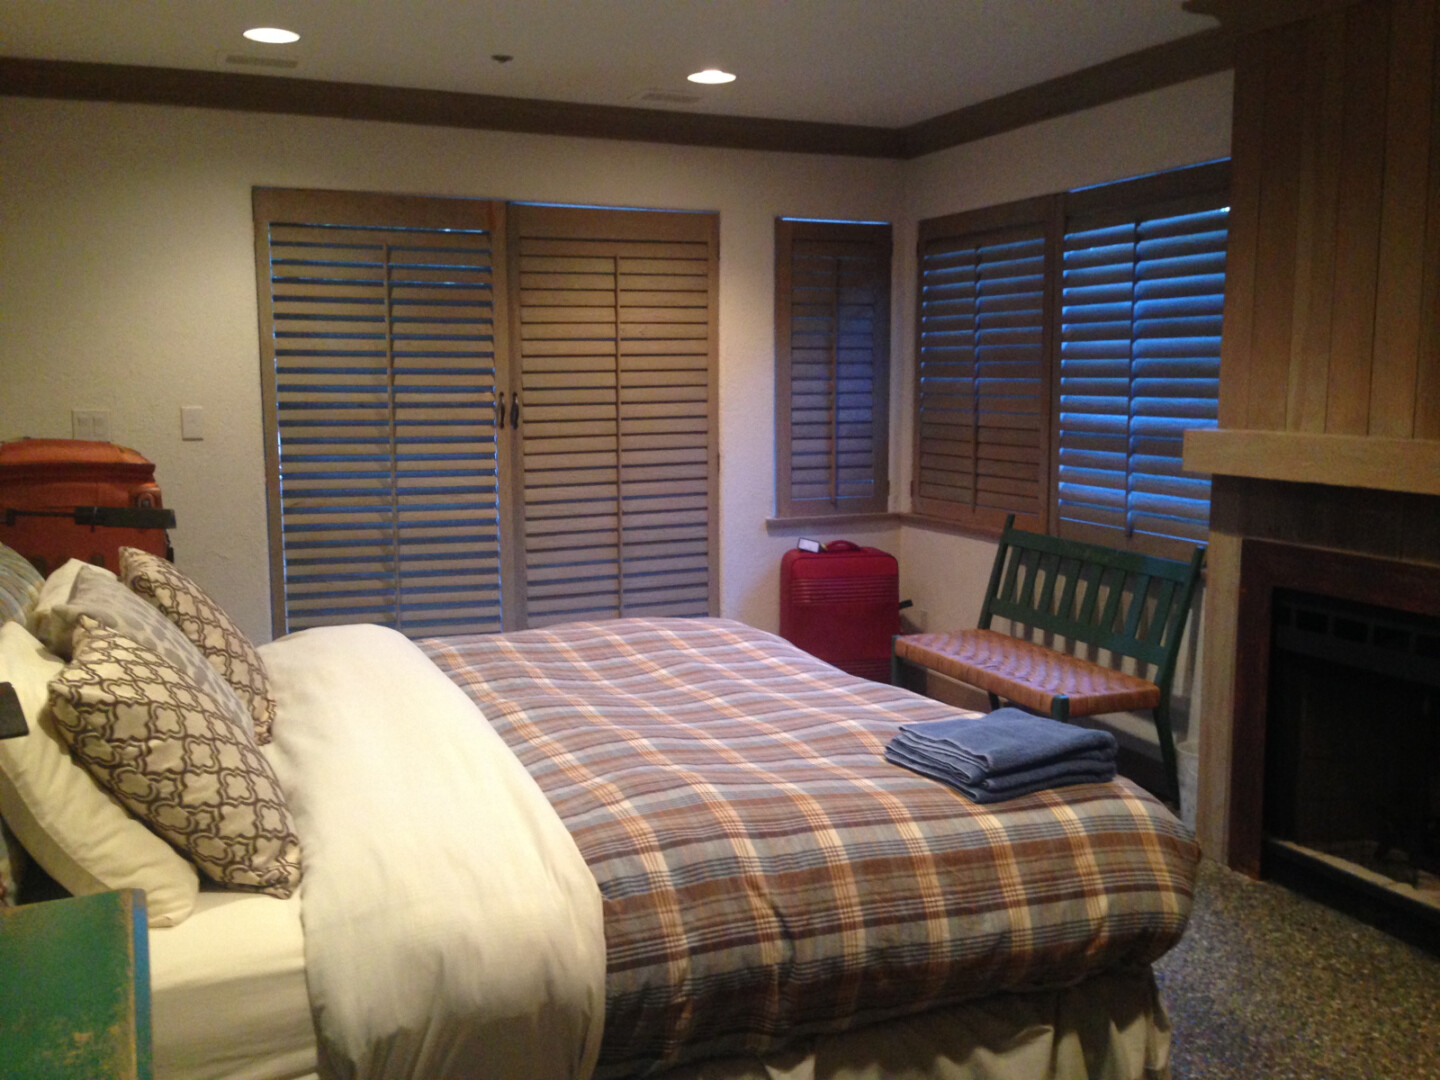 a bed with a blanket and a bench in a room with shutters